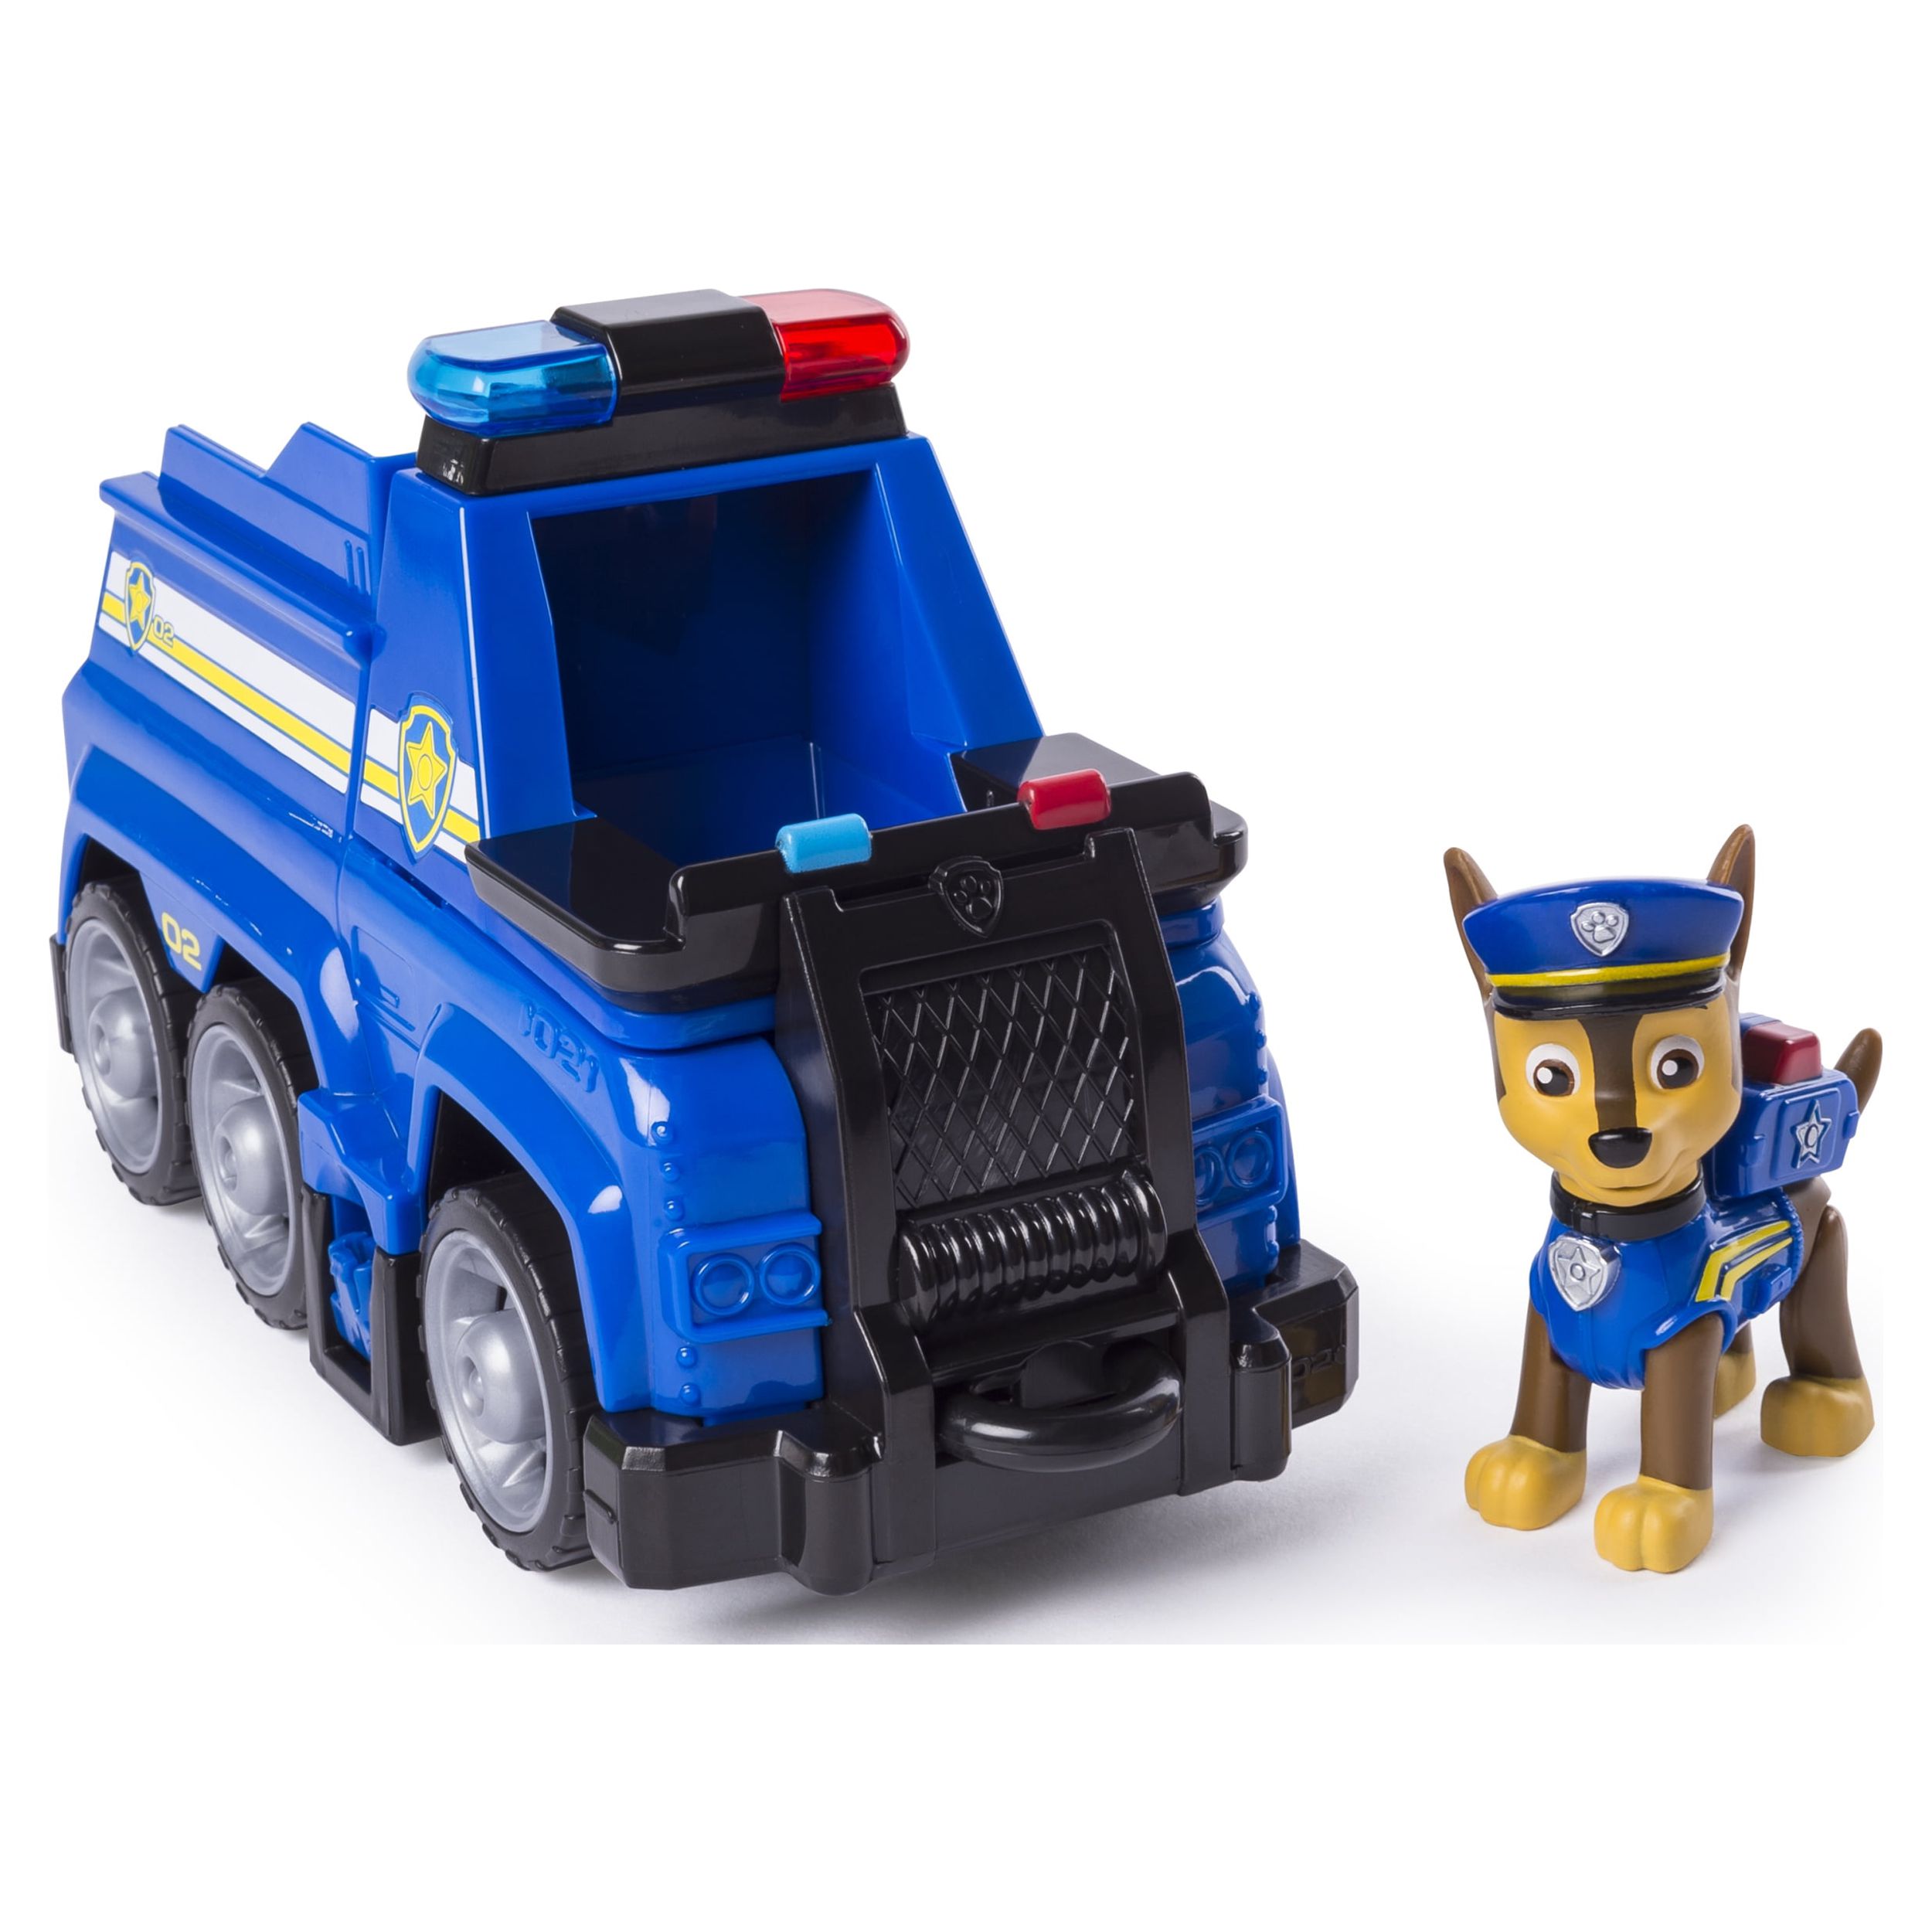 PAW Patrol Ultimate Rescue, Chase’s Ultimate Rescue Police Cruiser with Lifting Seat and Fold-out Barricade, for Ages 3 and Up - image 1 of 7